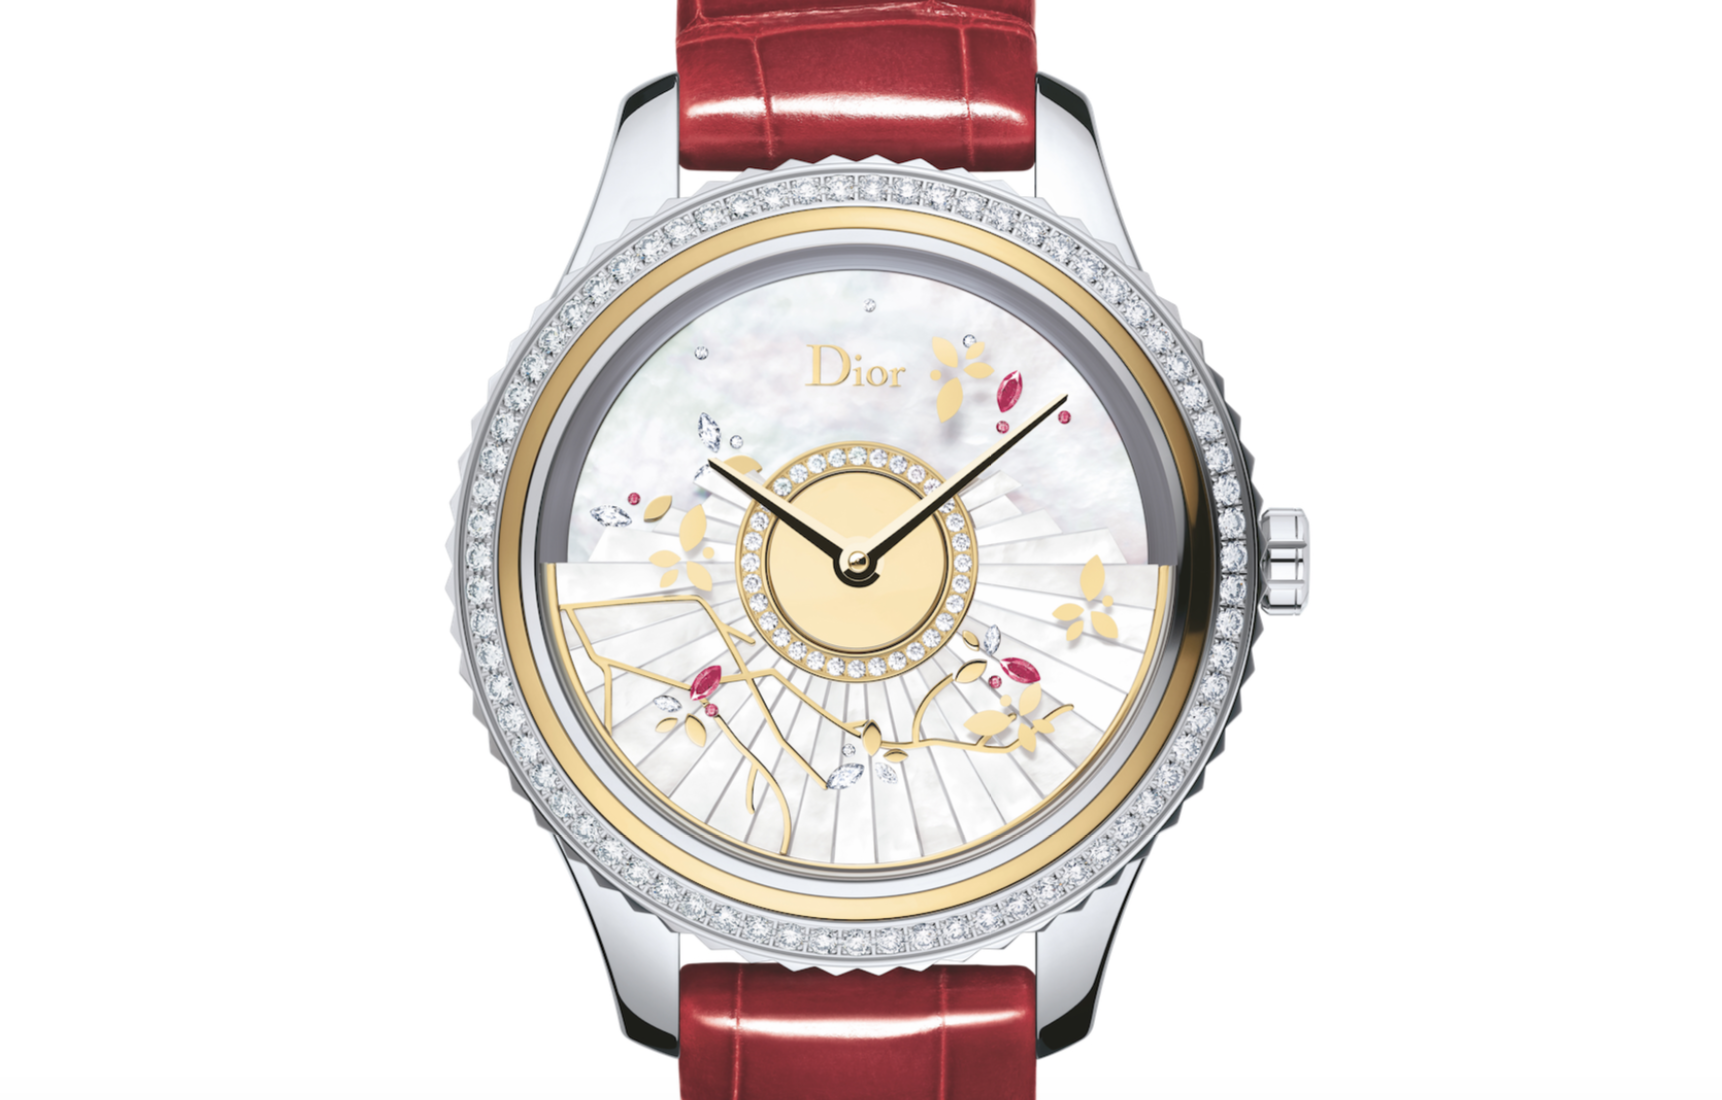 Watches Wednesday: Dior's Chinese New Year Special Edition Grand Bal Timepiece